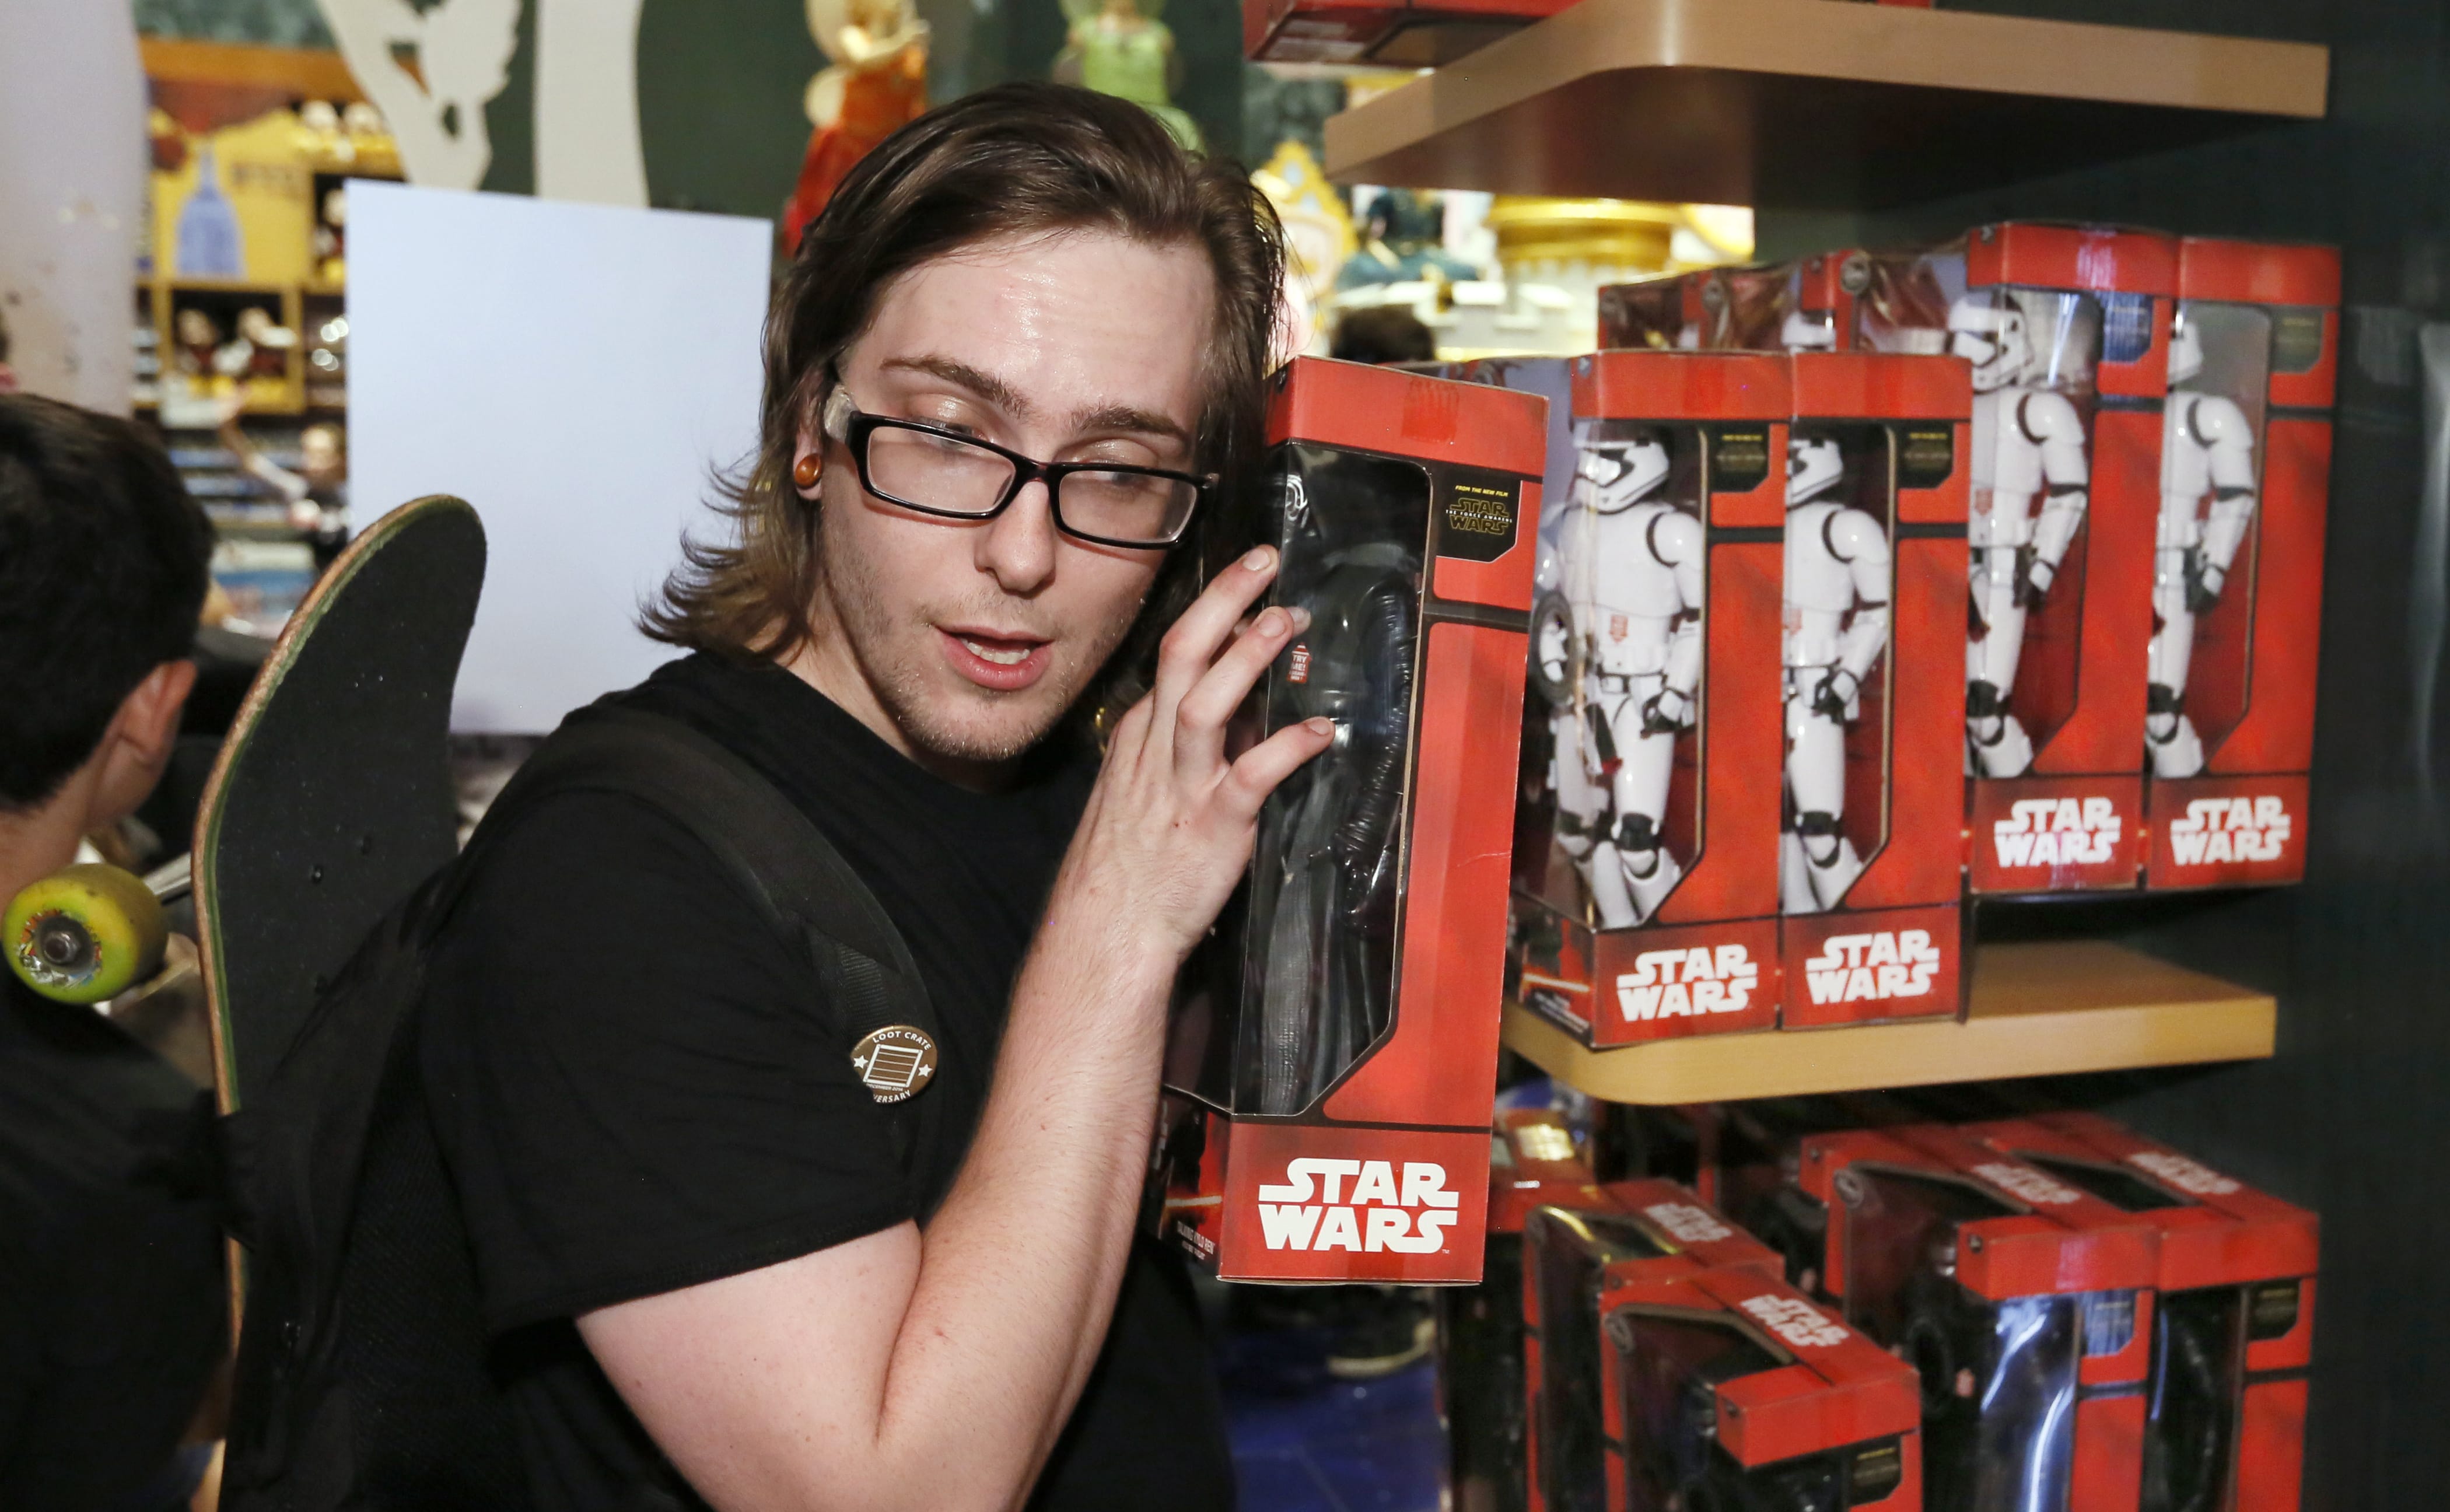 Elijah Catrone, of Queens, N.Y., listens to a talking action figure as Force Friday kicks off at Disney Store in New York's Times Square, on Friday to celebrate the launch of merchandise for "Star Wars: The Force Awakens."